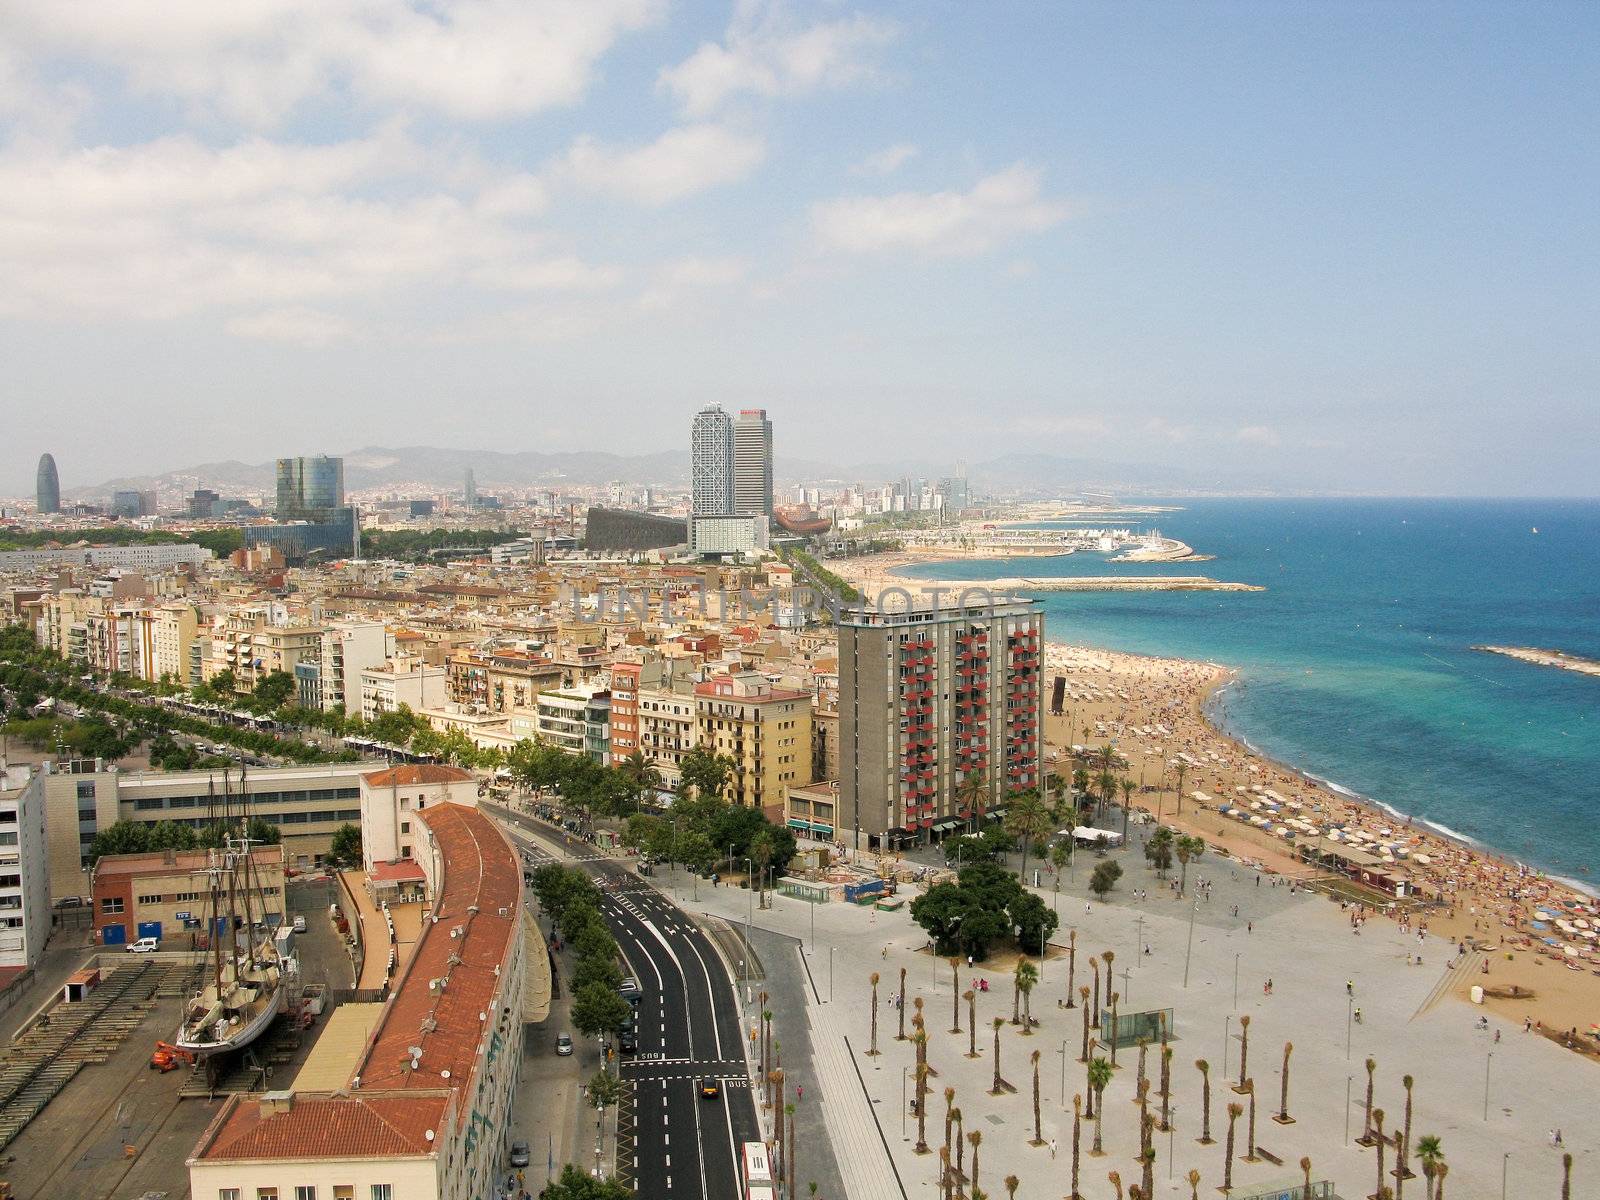 Beach and cityscape of barcelona seen from the port vell aerial tramway